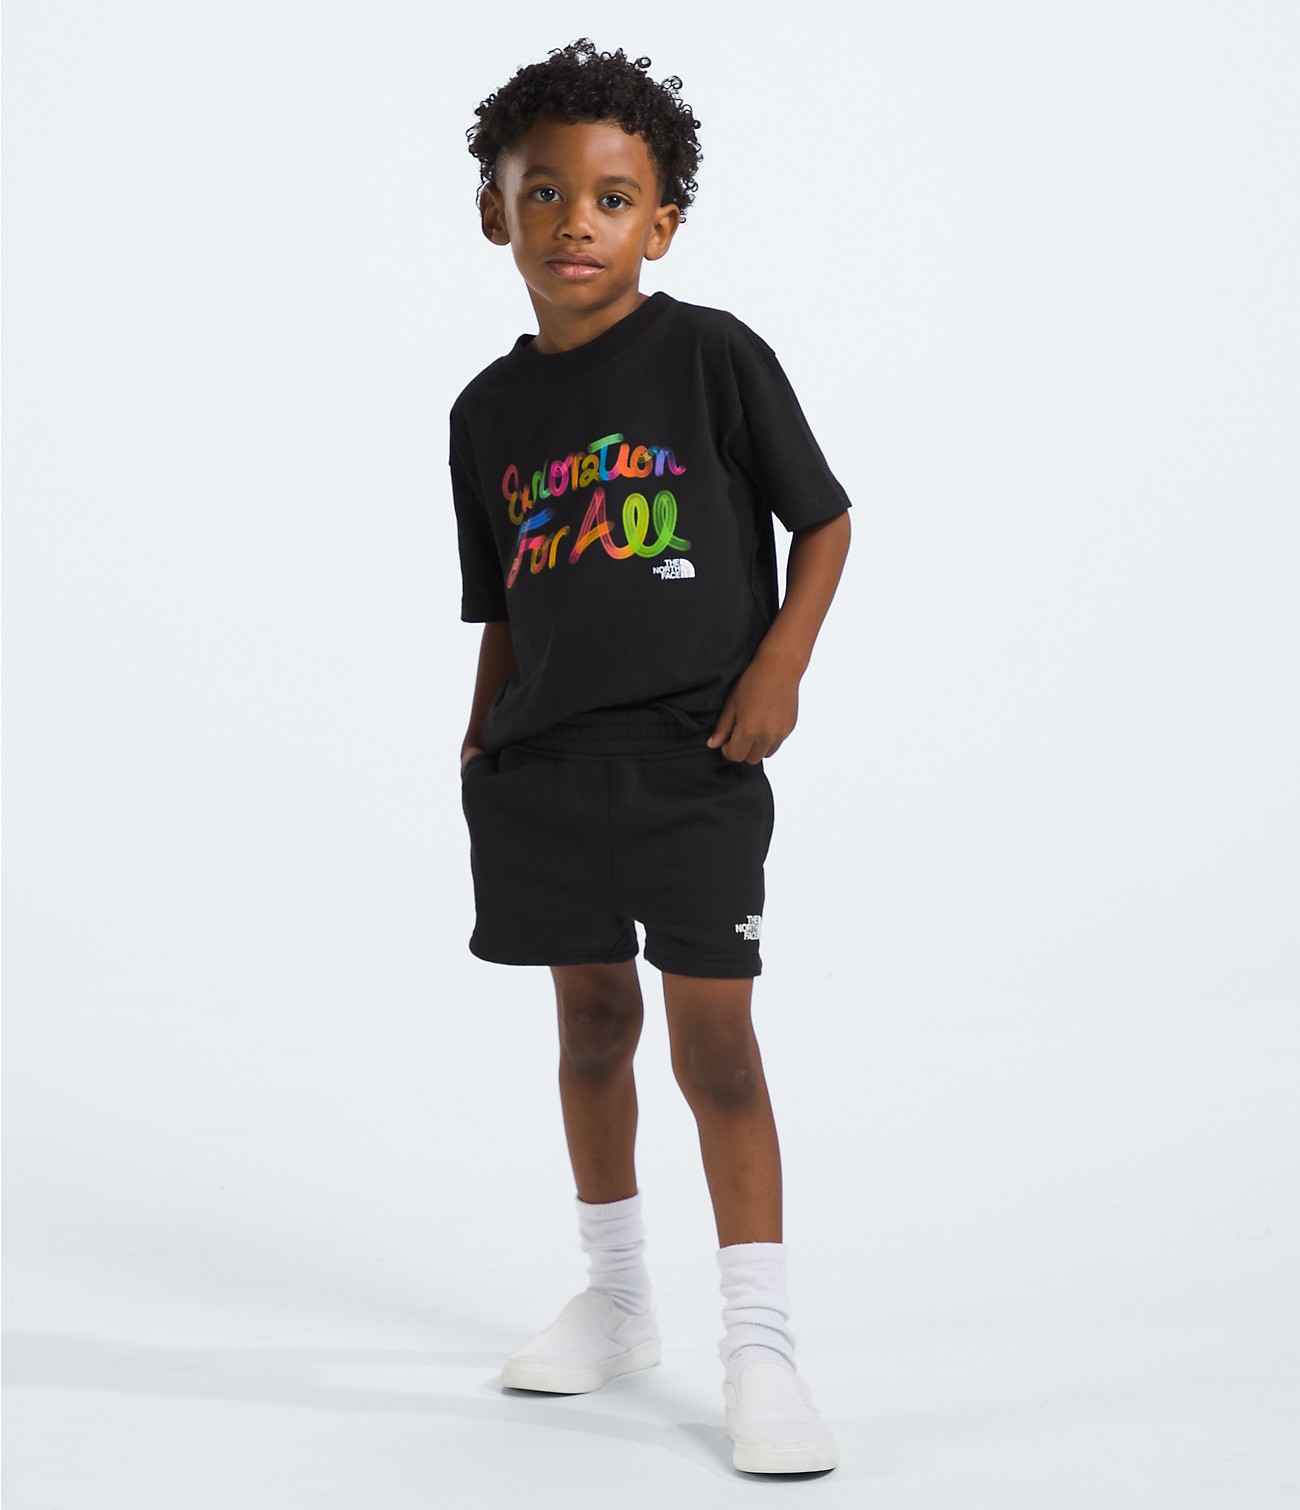 Kids’ Camp Fleece Shorts | The North Face